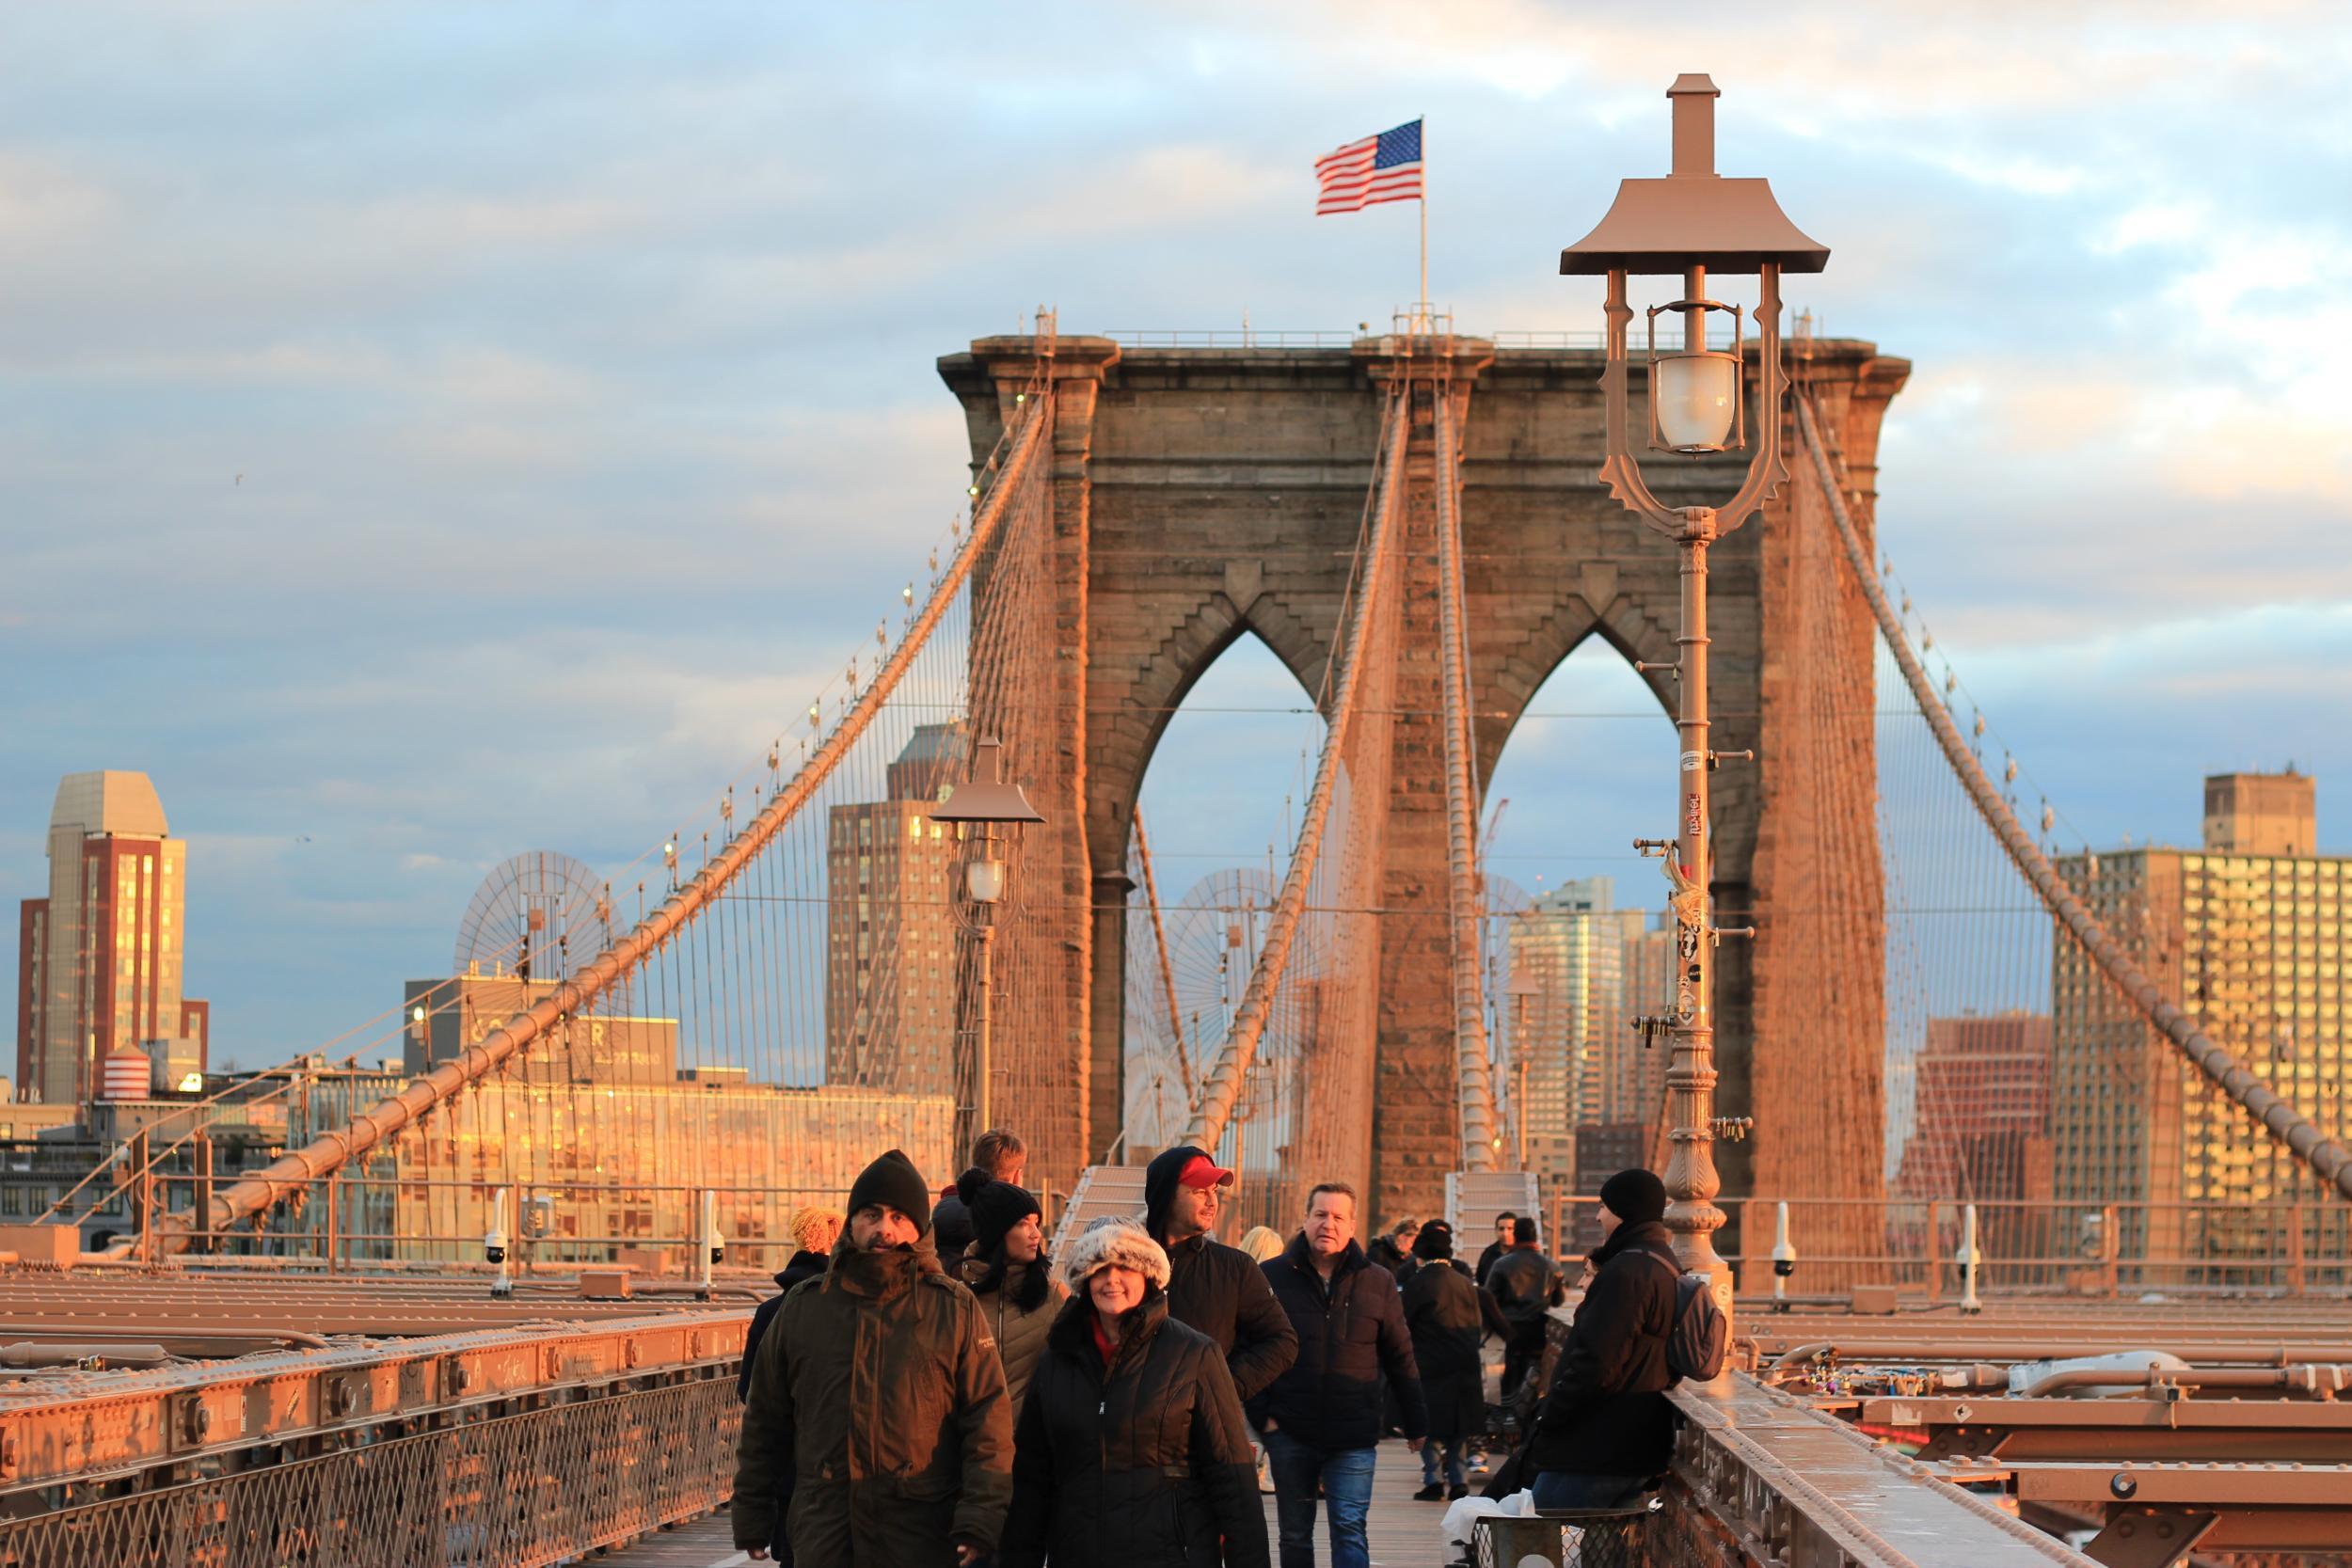 Passing between boroughs on the Brooklyn Bridge is a New York must